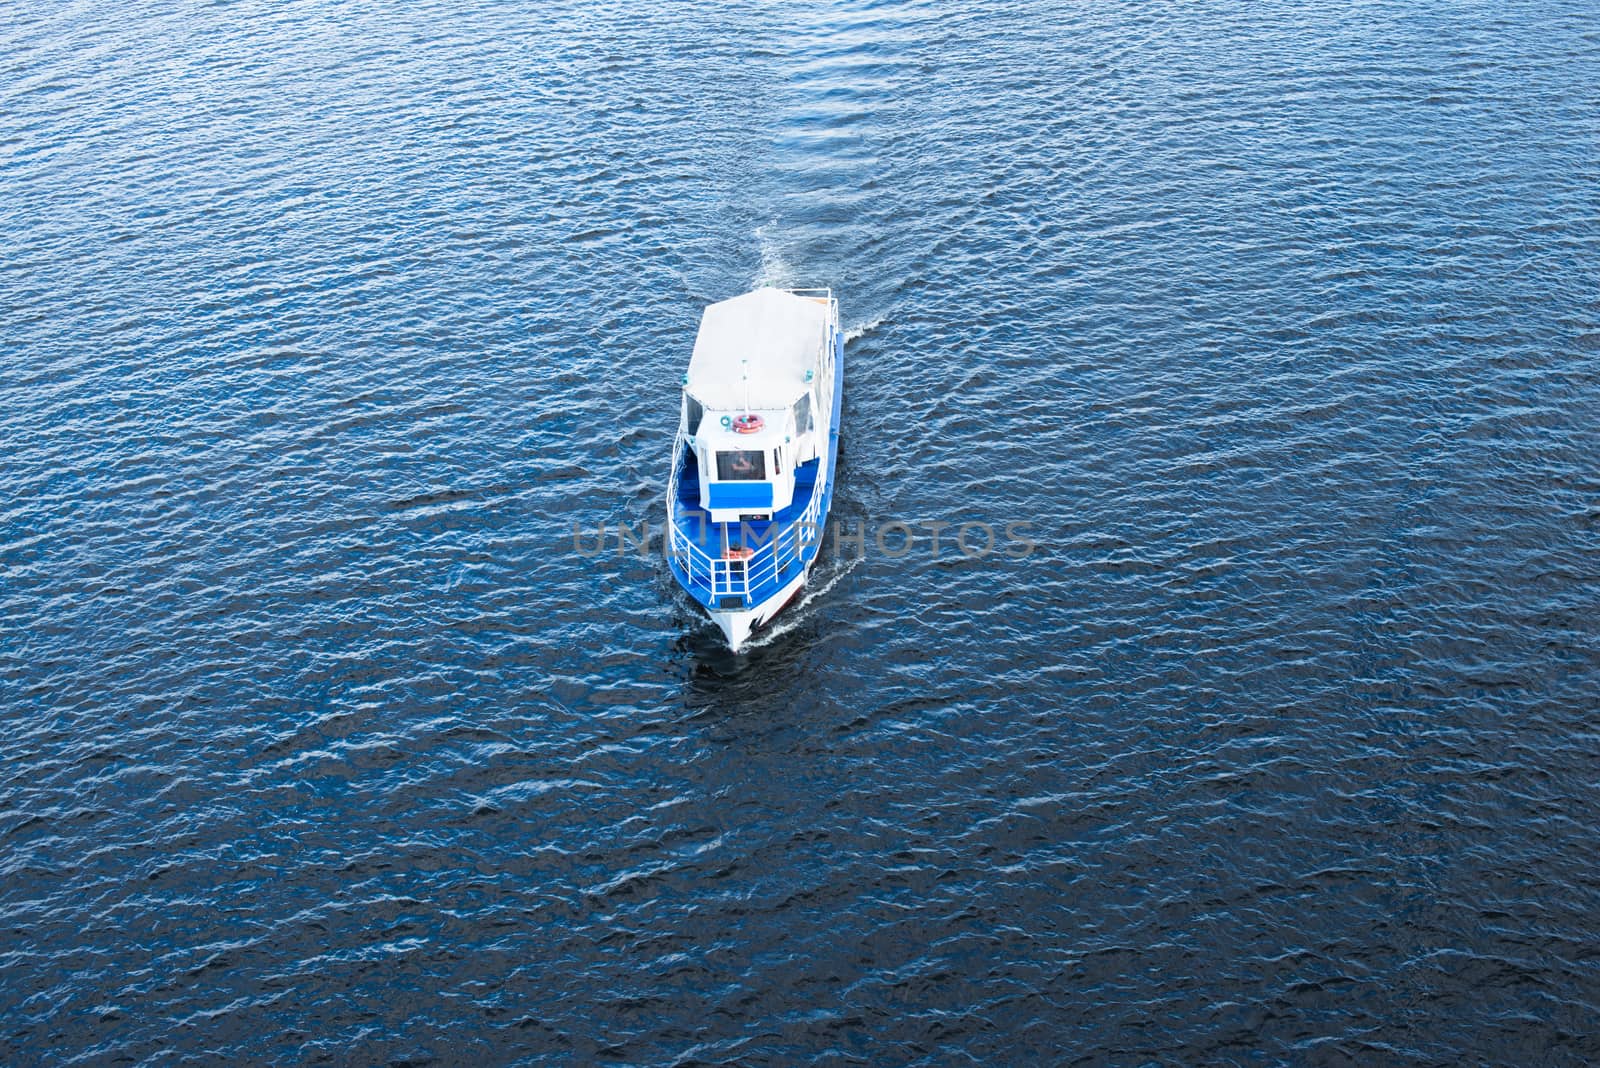 The boat floating in the blue Dnieper waters.